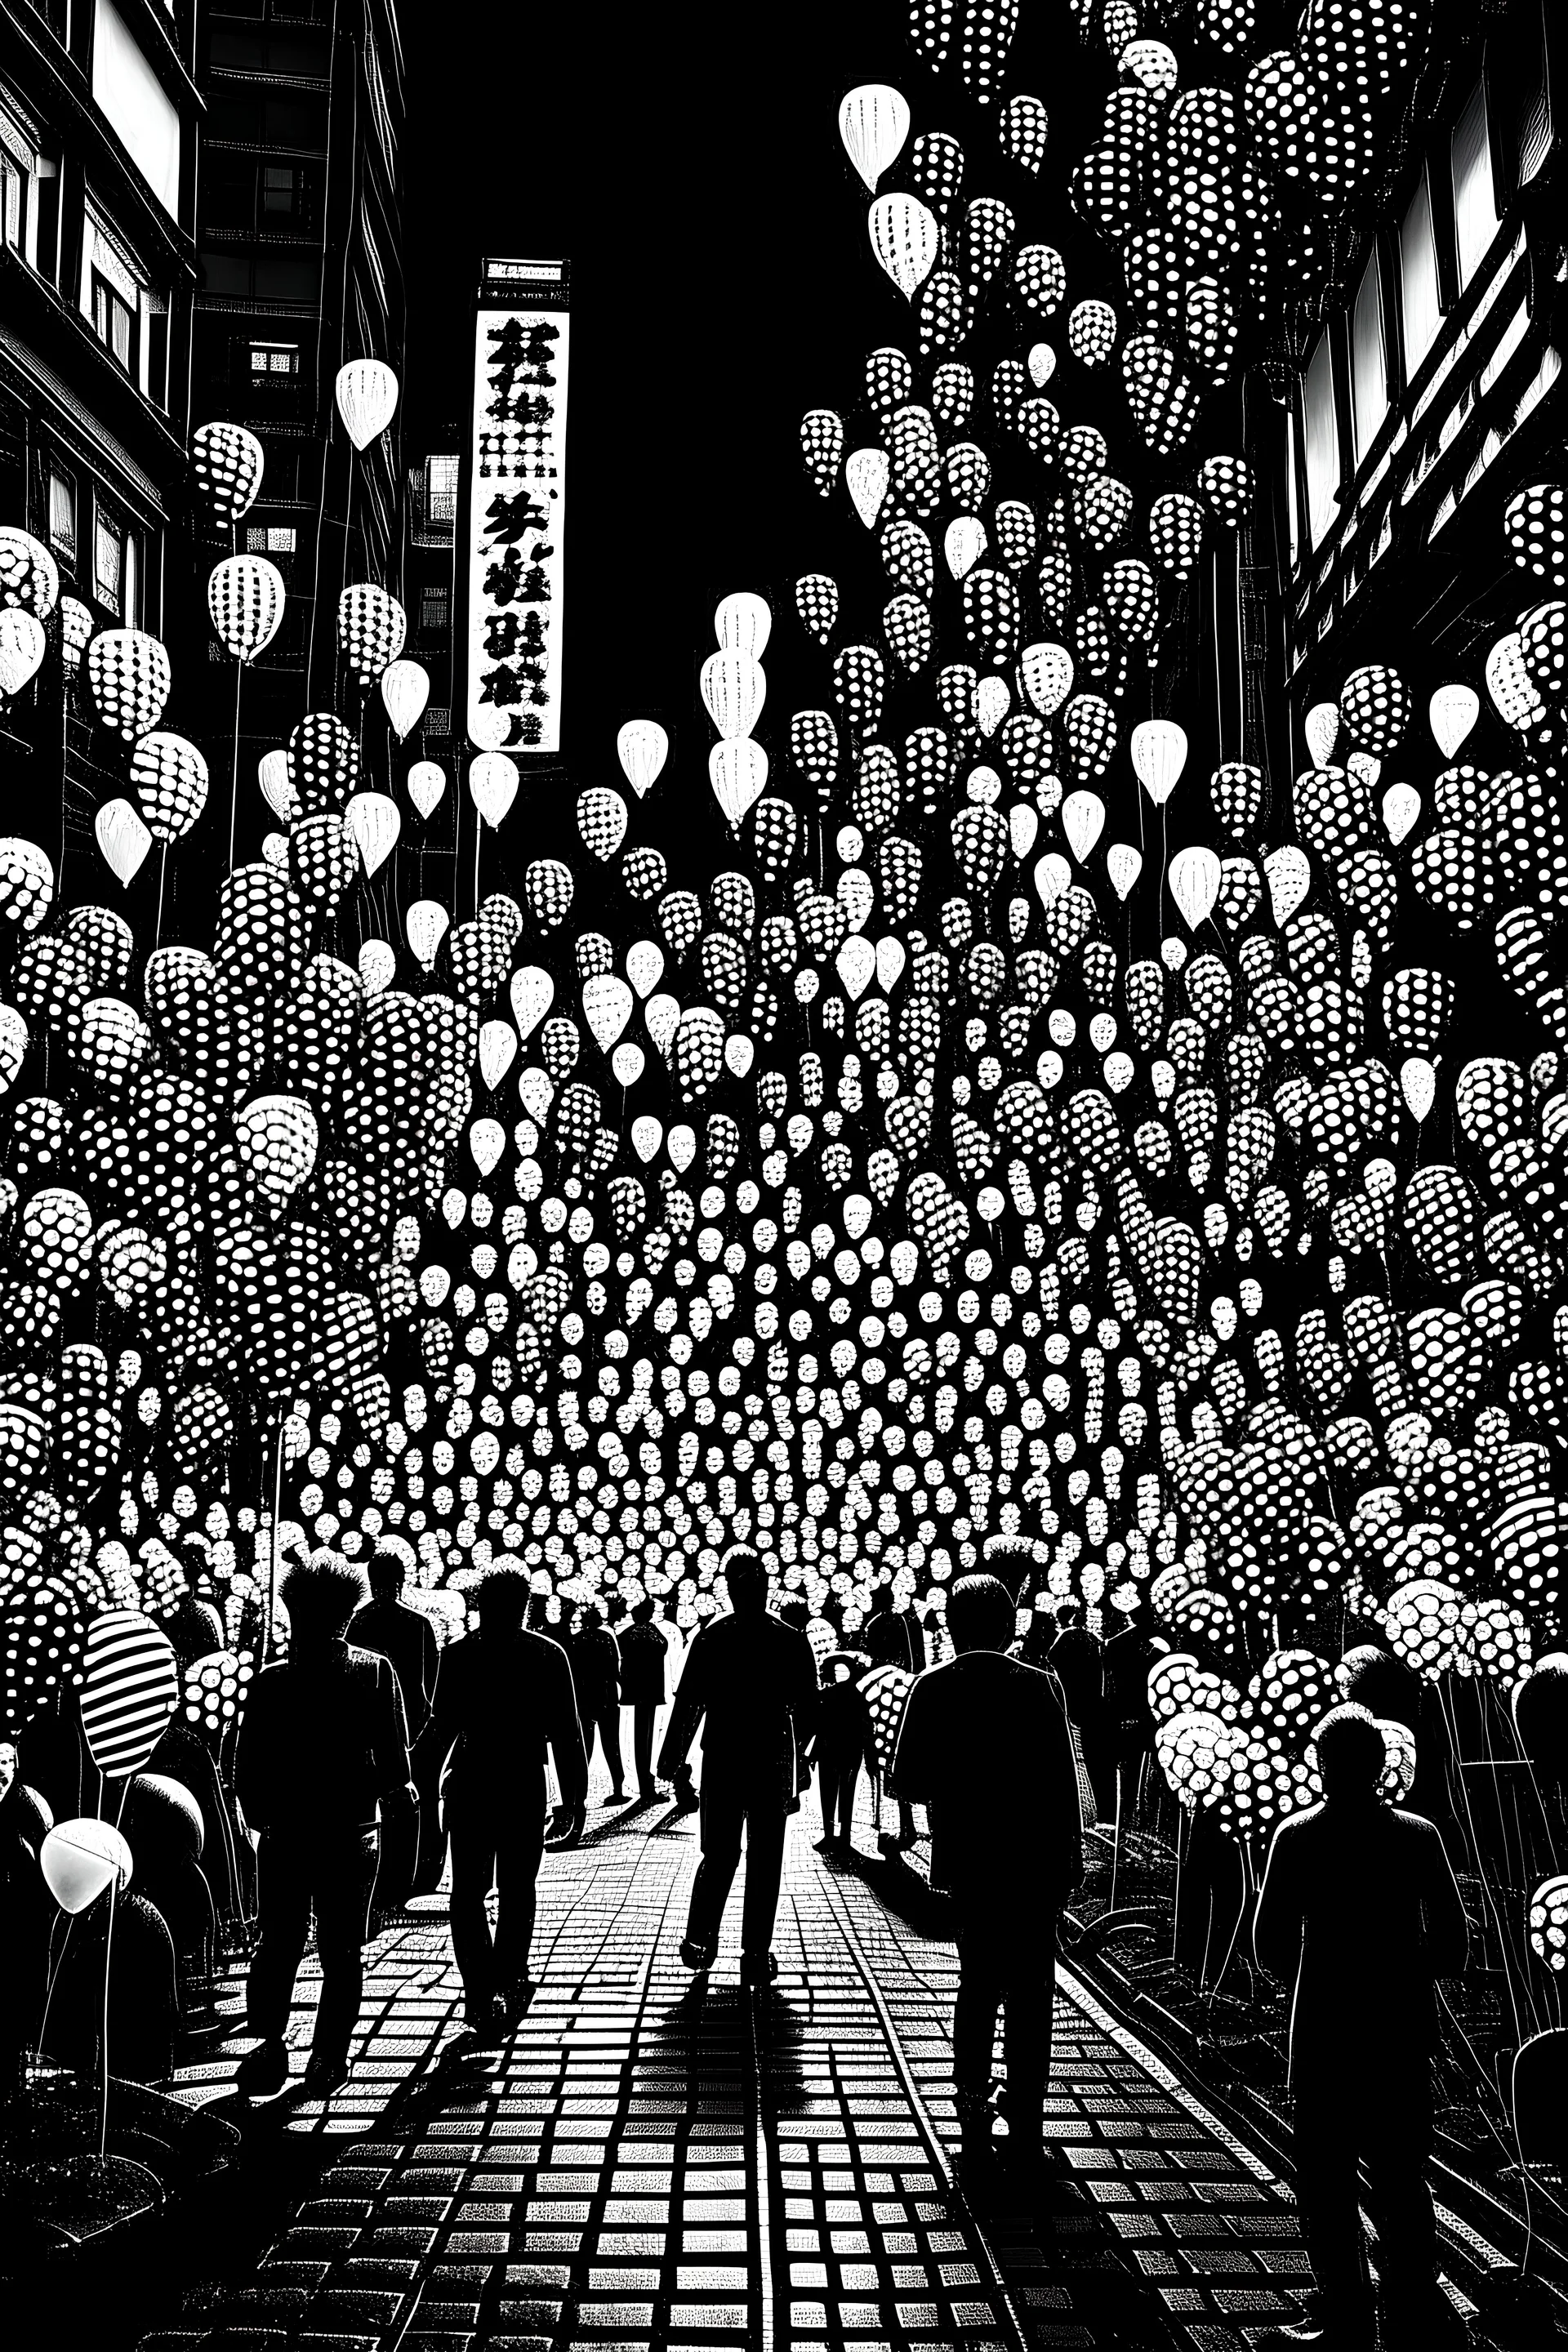 BLACKBACKGROUND BLACK AND WHITE MANY MANY SMALL PARTY BALLOONS ON A TOKYO STREET IN THE STYLE OF HIROKU OGAI